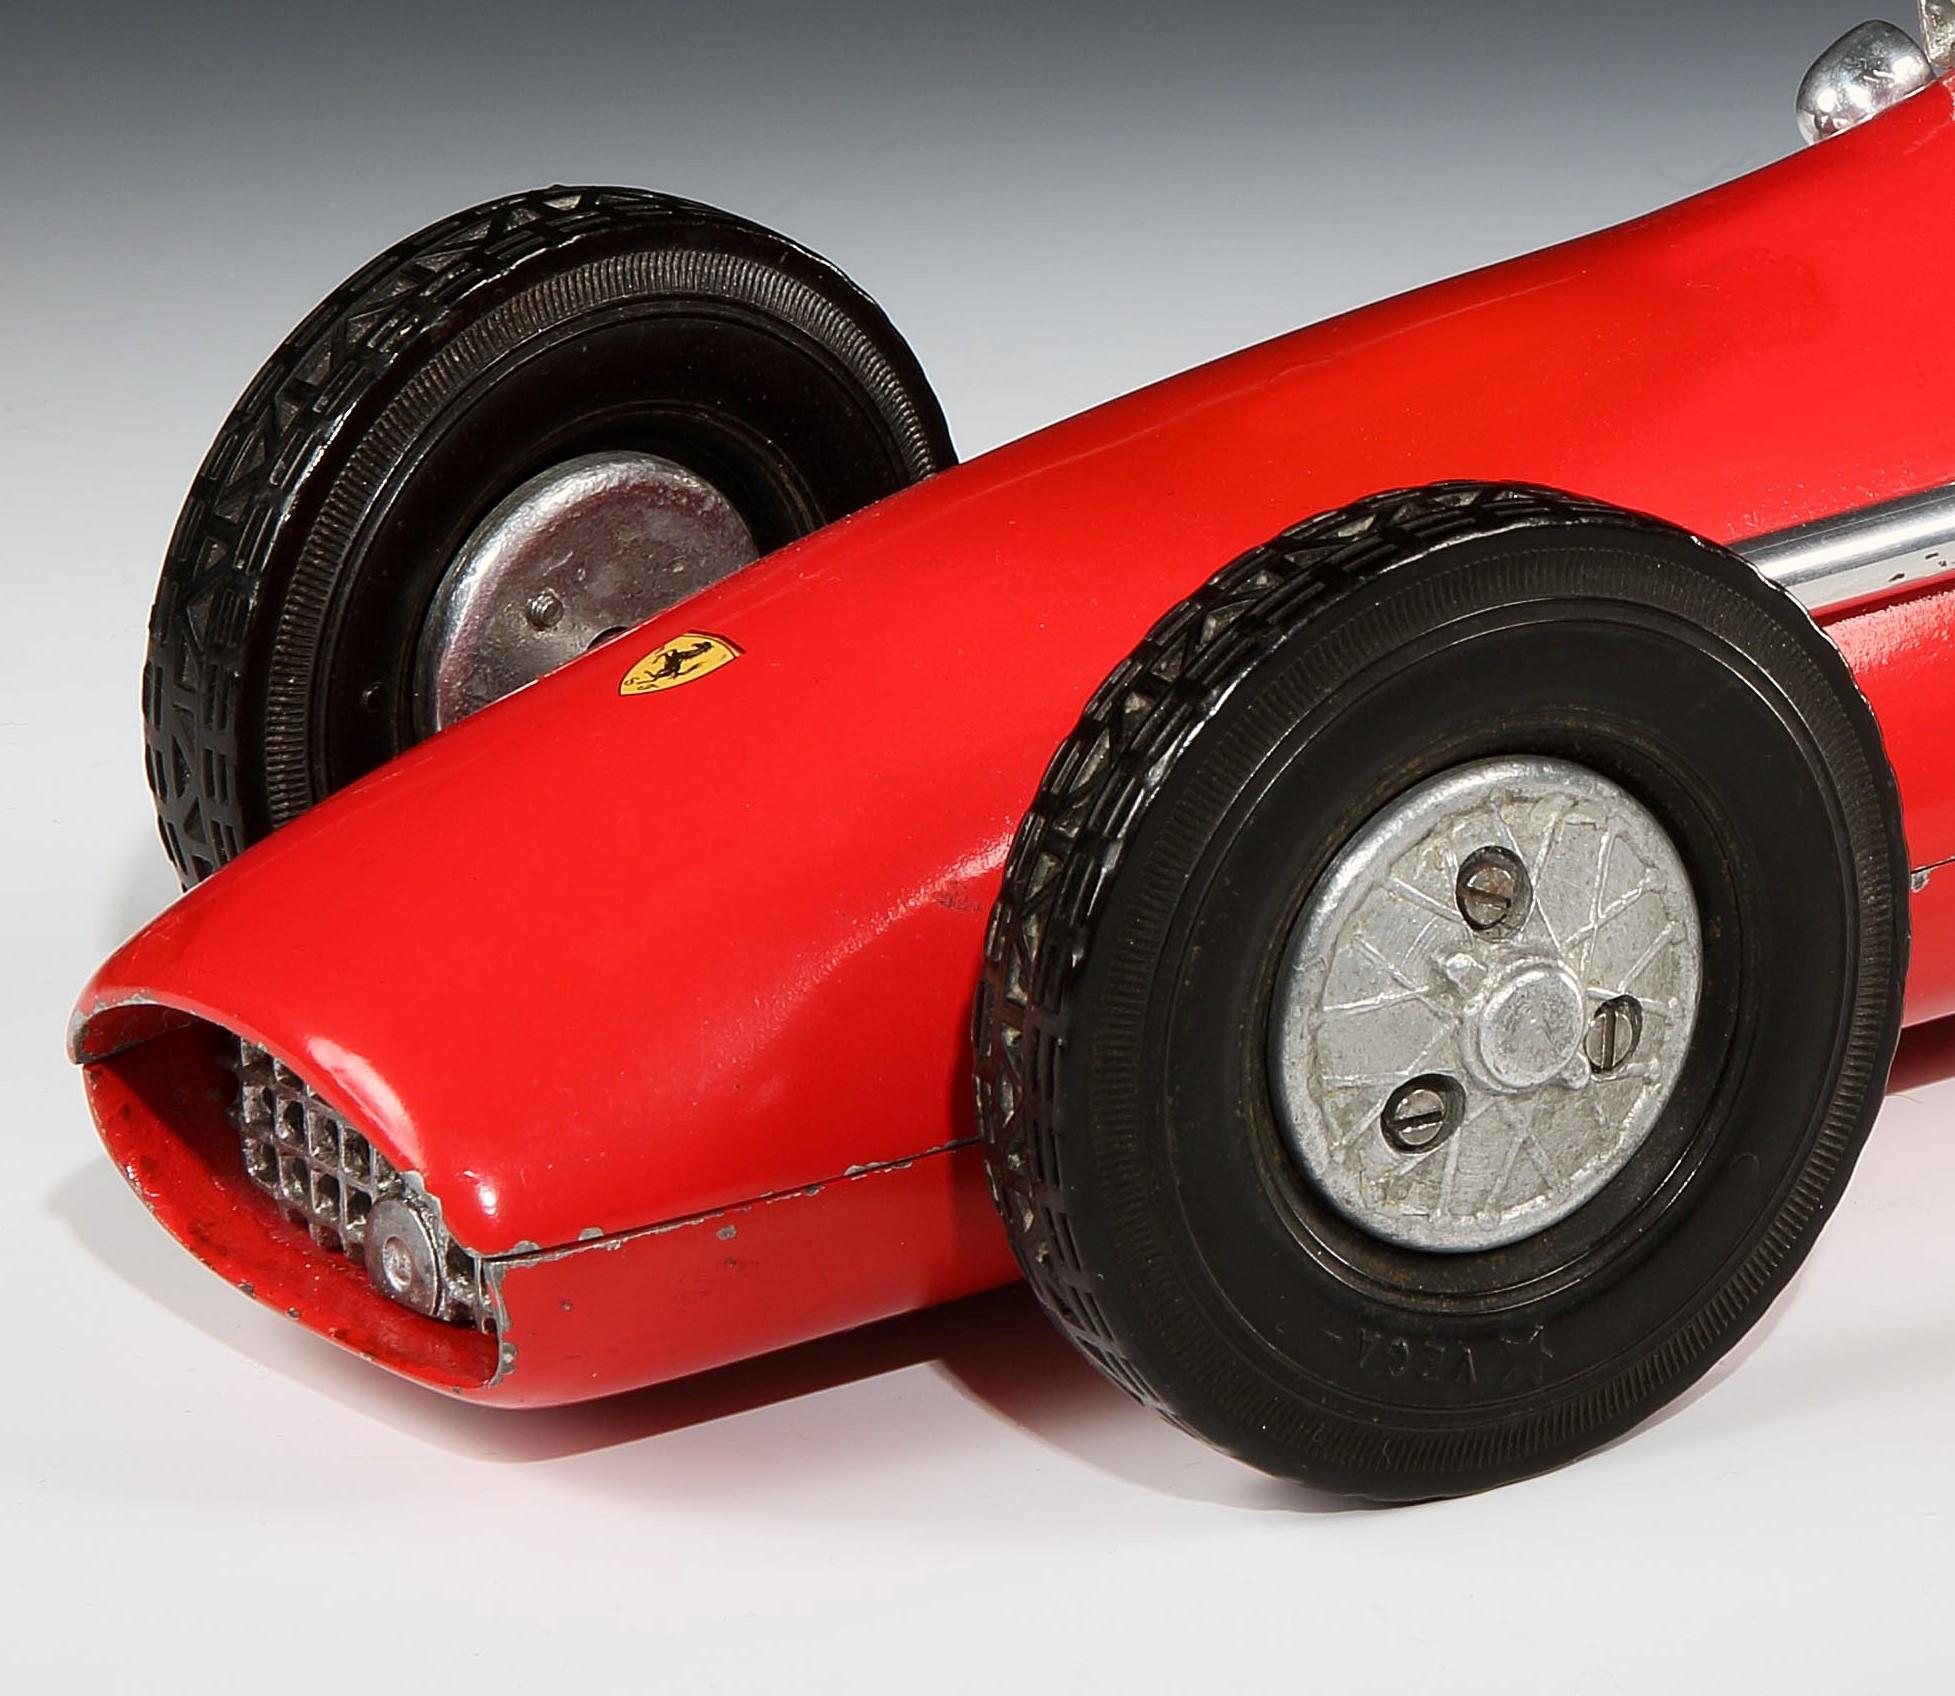 Vega: ‘Ferrari 500 F2’

An all cast, heavy aluminium pylon racer, with exhaust and hubcap detailing, with side mirrors, steering wheel and stylized ‘windshield’, powered by a rear-axel driven, 5cc glow plug petrol engine (not run, but capable of